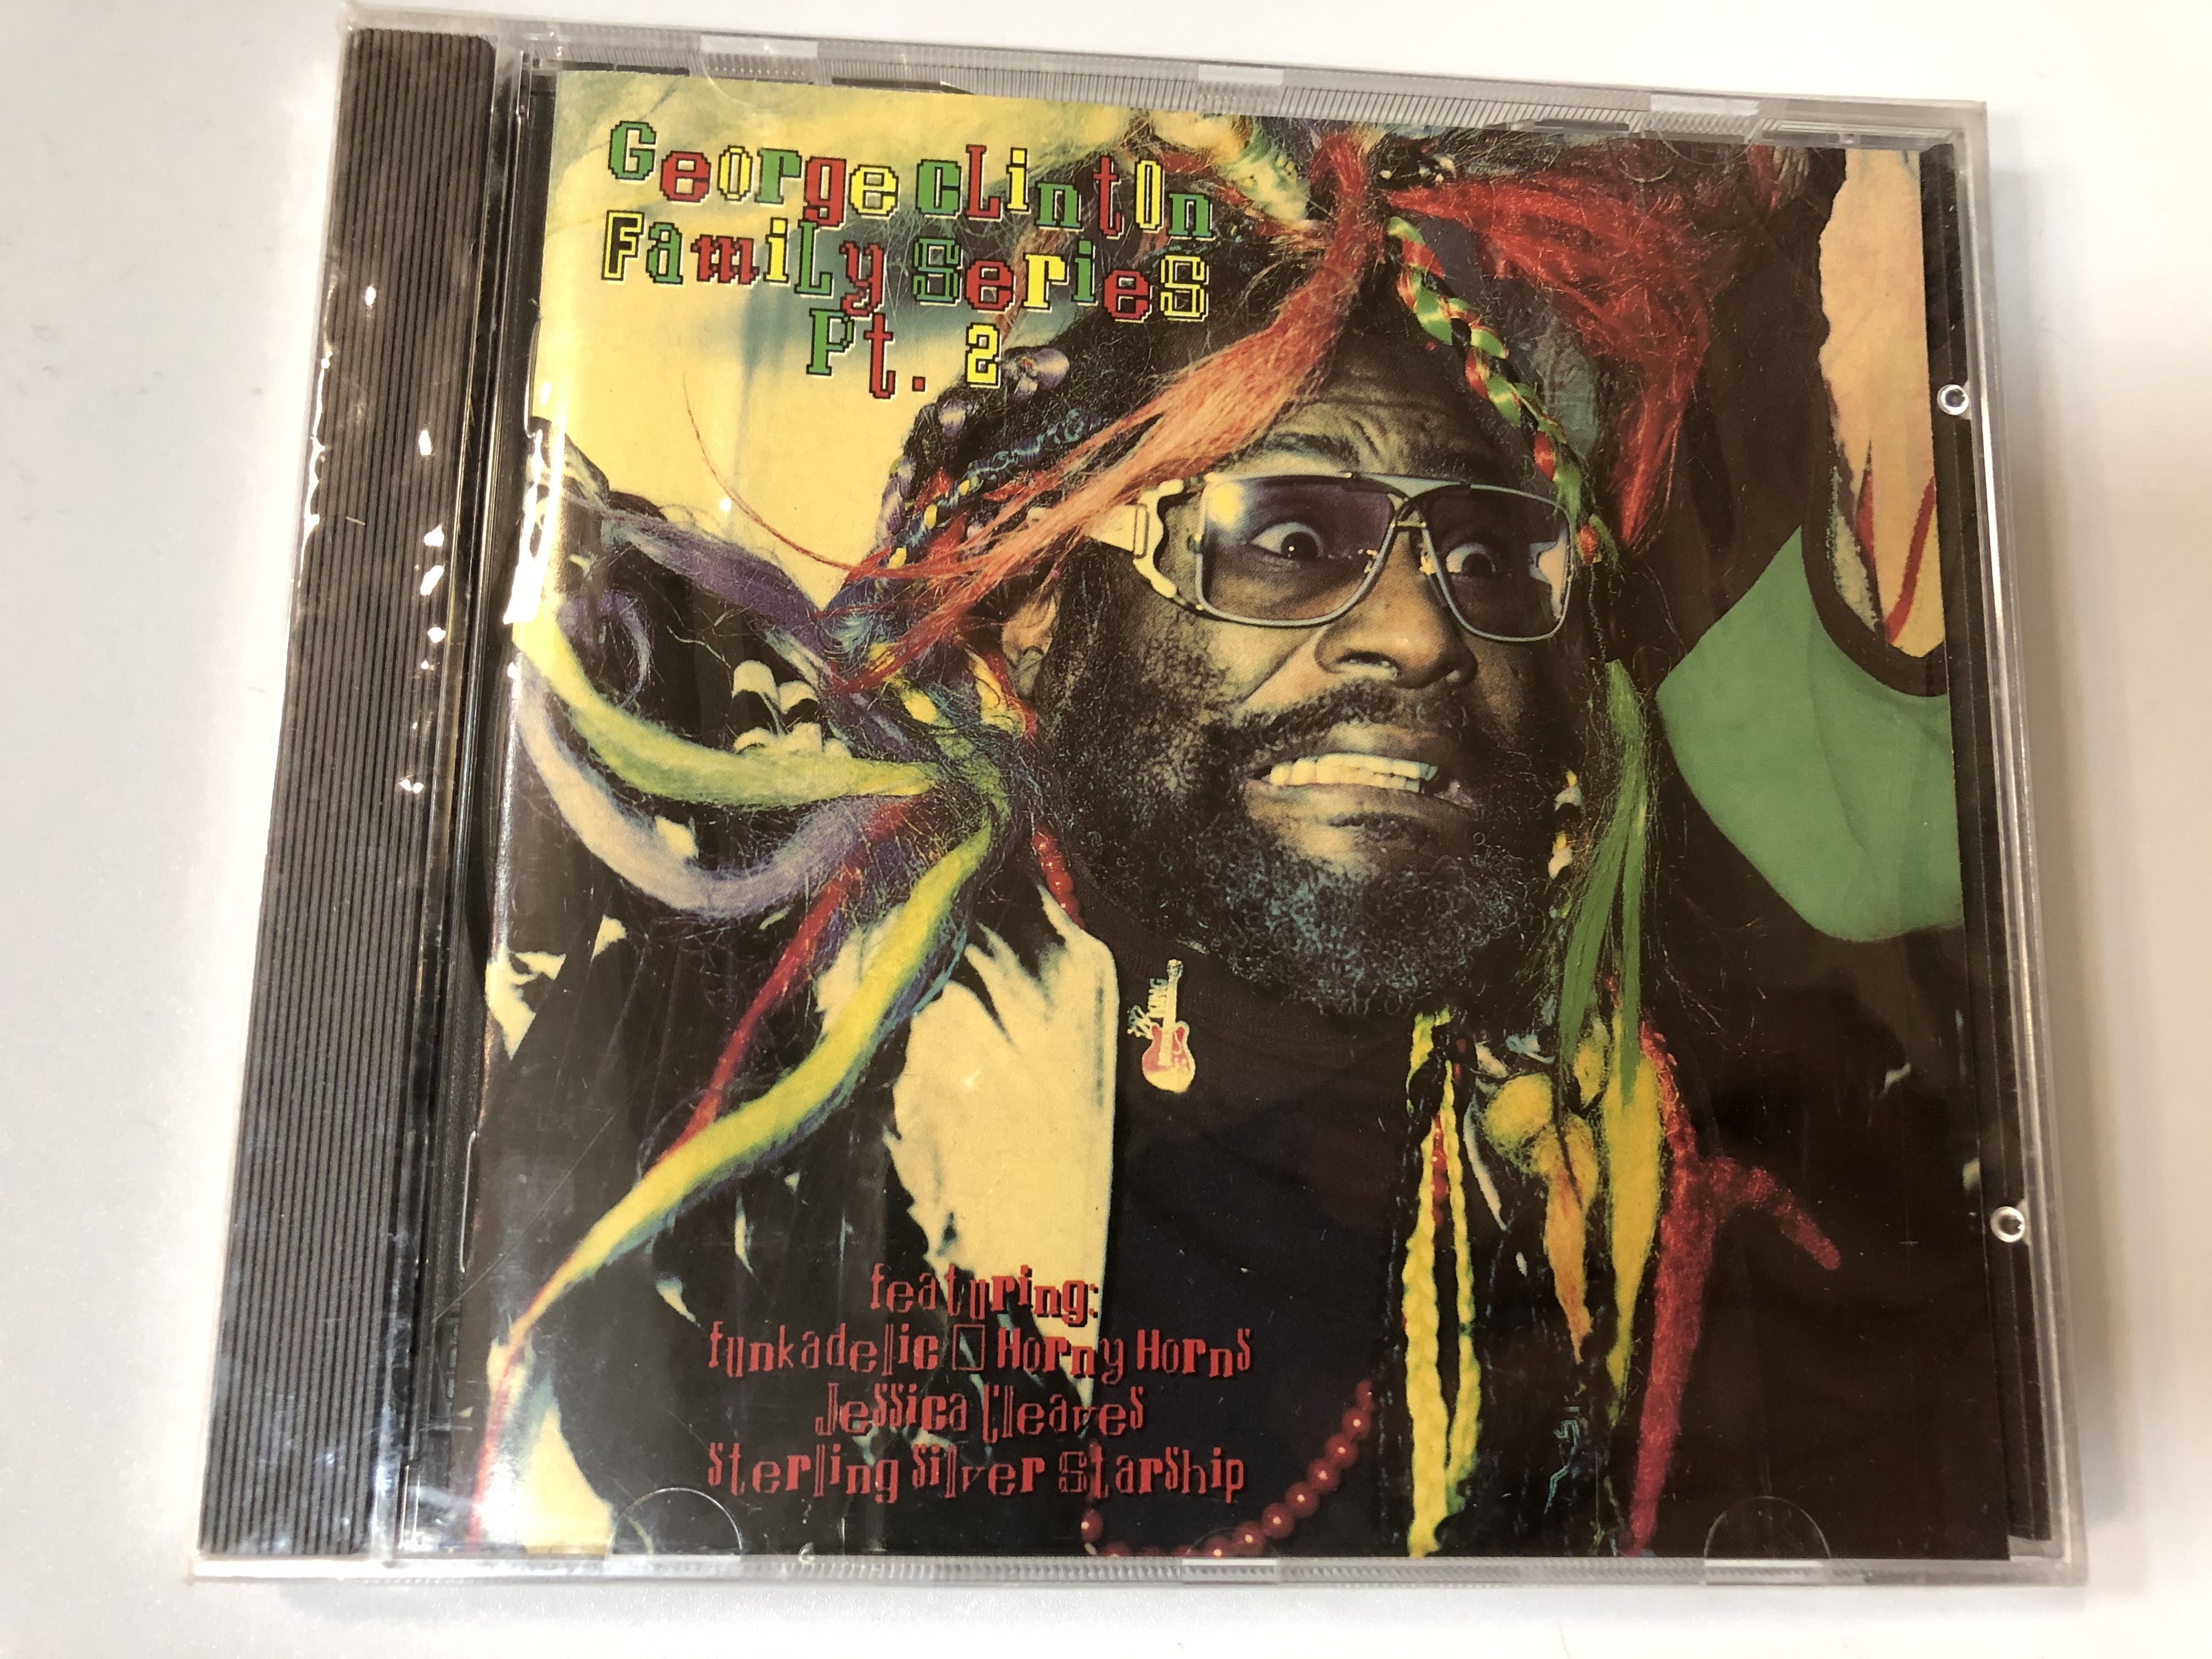 george-clinton-family-series-pt.-2-featuring-funkadelic-horny-horns-jessica-cleaves-sterling-silver-starship-essential-audio-cd-1993-esmcd-384-1-.jpg